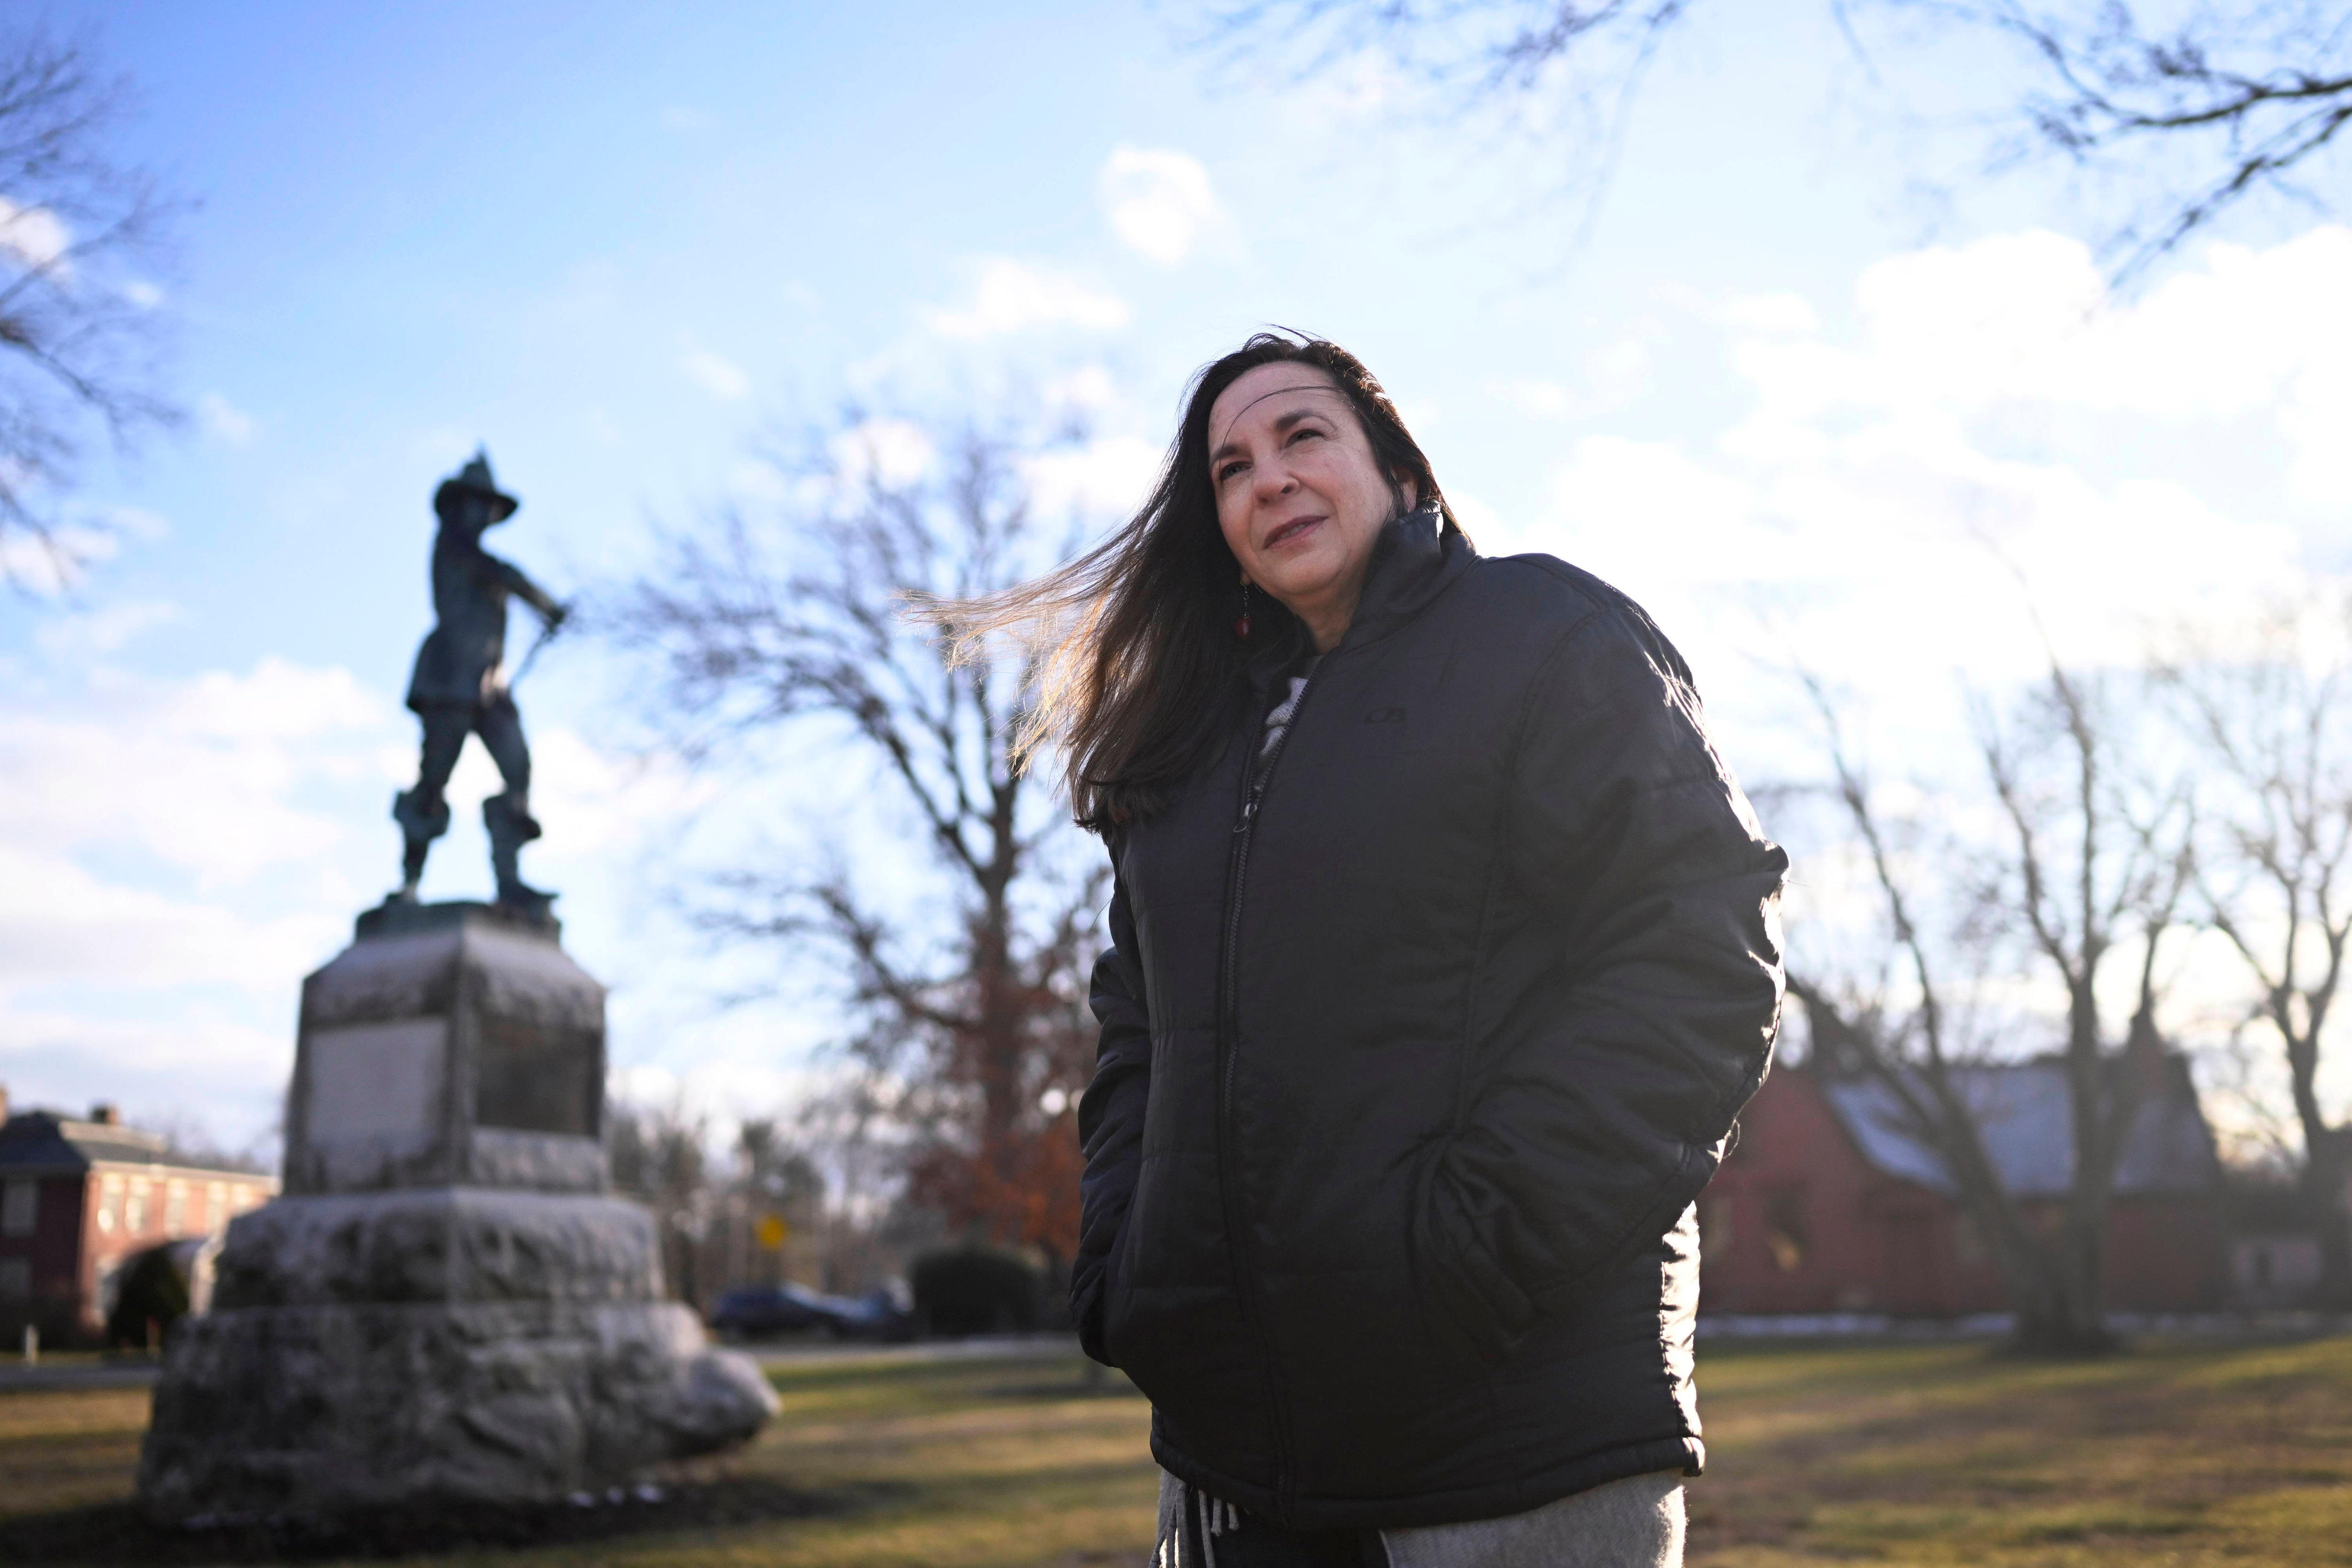 A woman stands in a park with a statue behind her